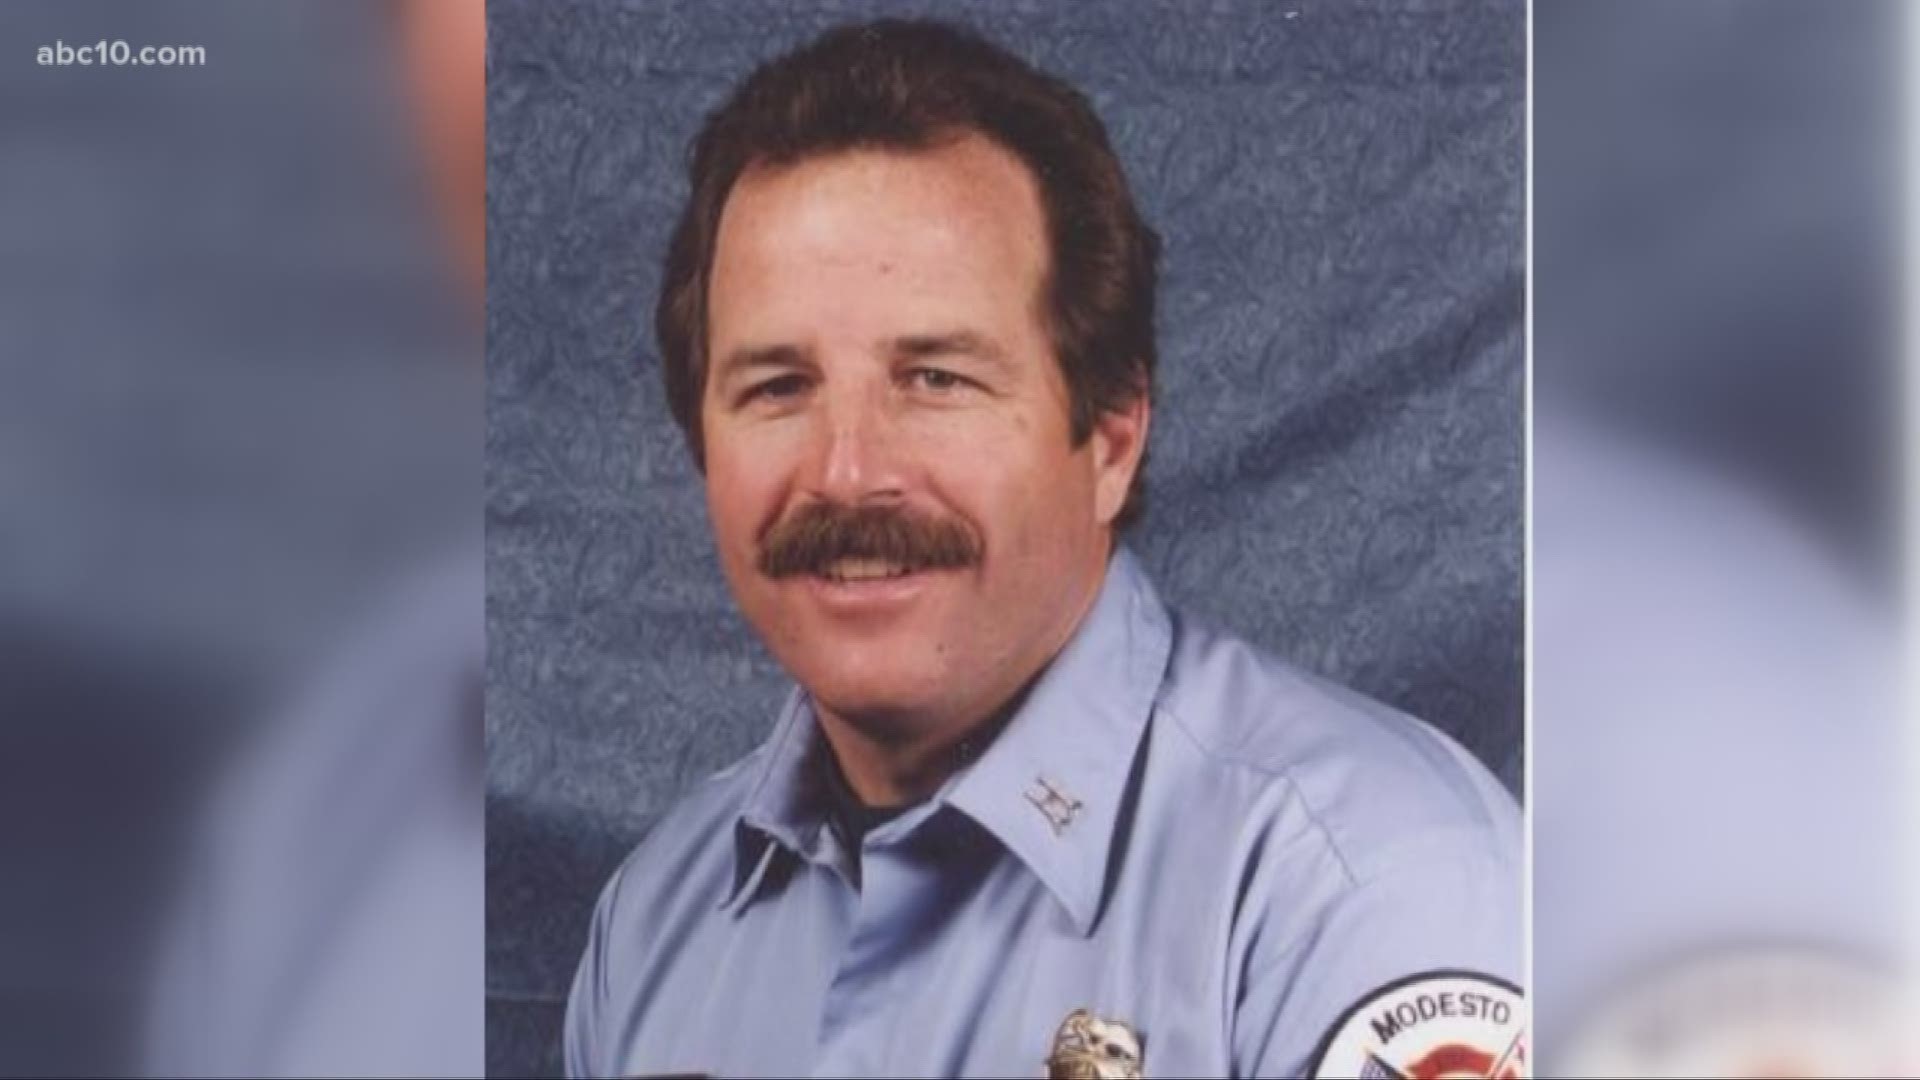 The Modesto Fire Department is mourning the loss of one their firefighters. 